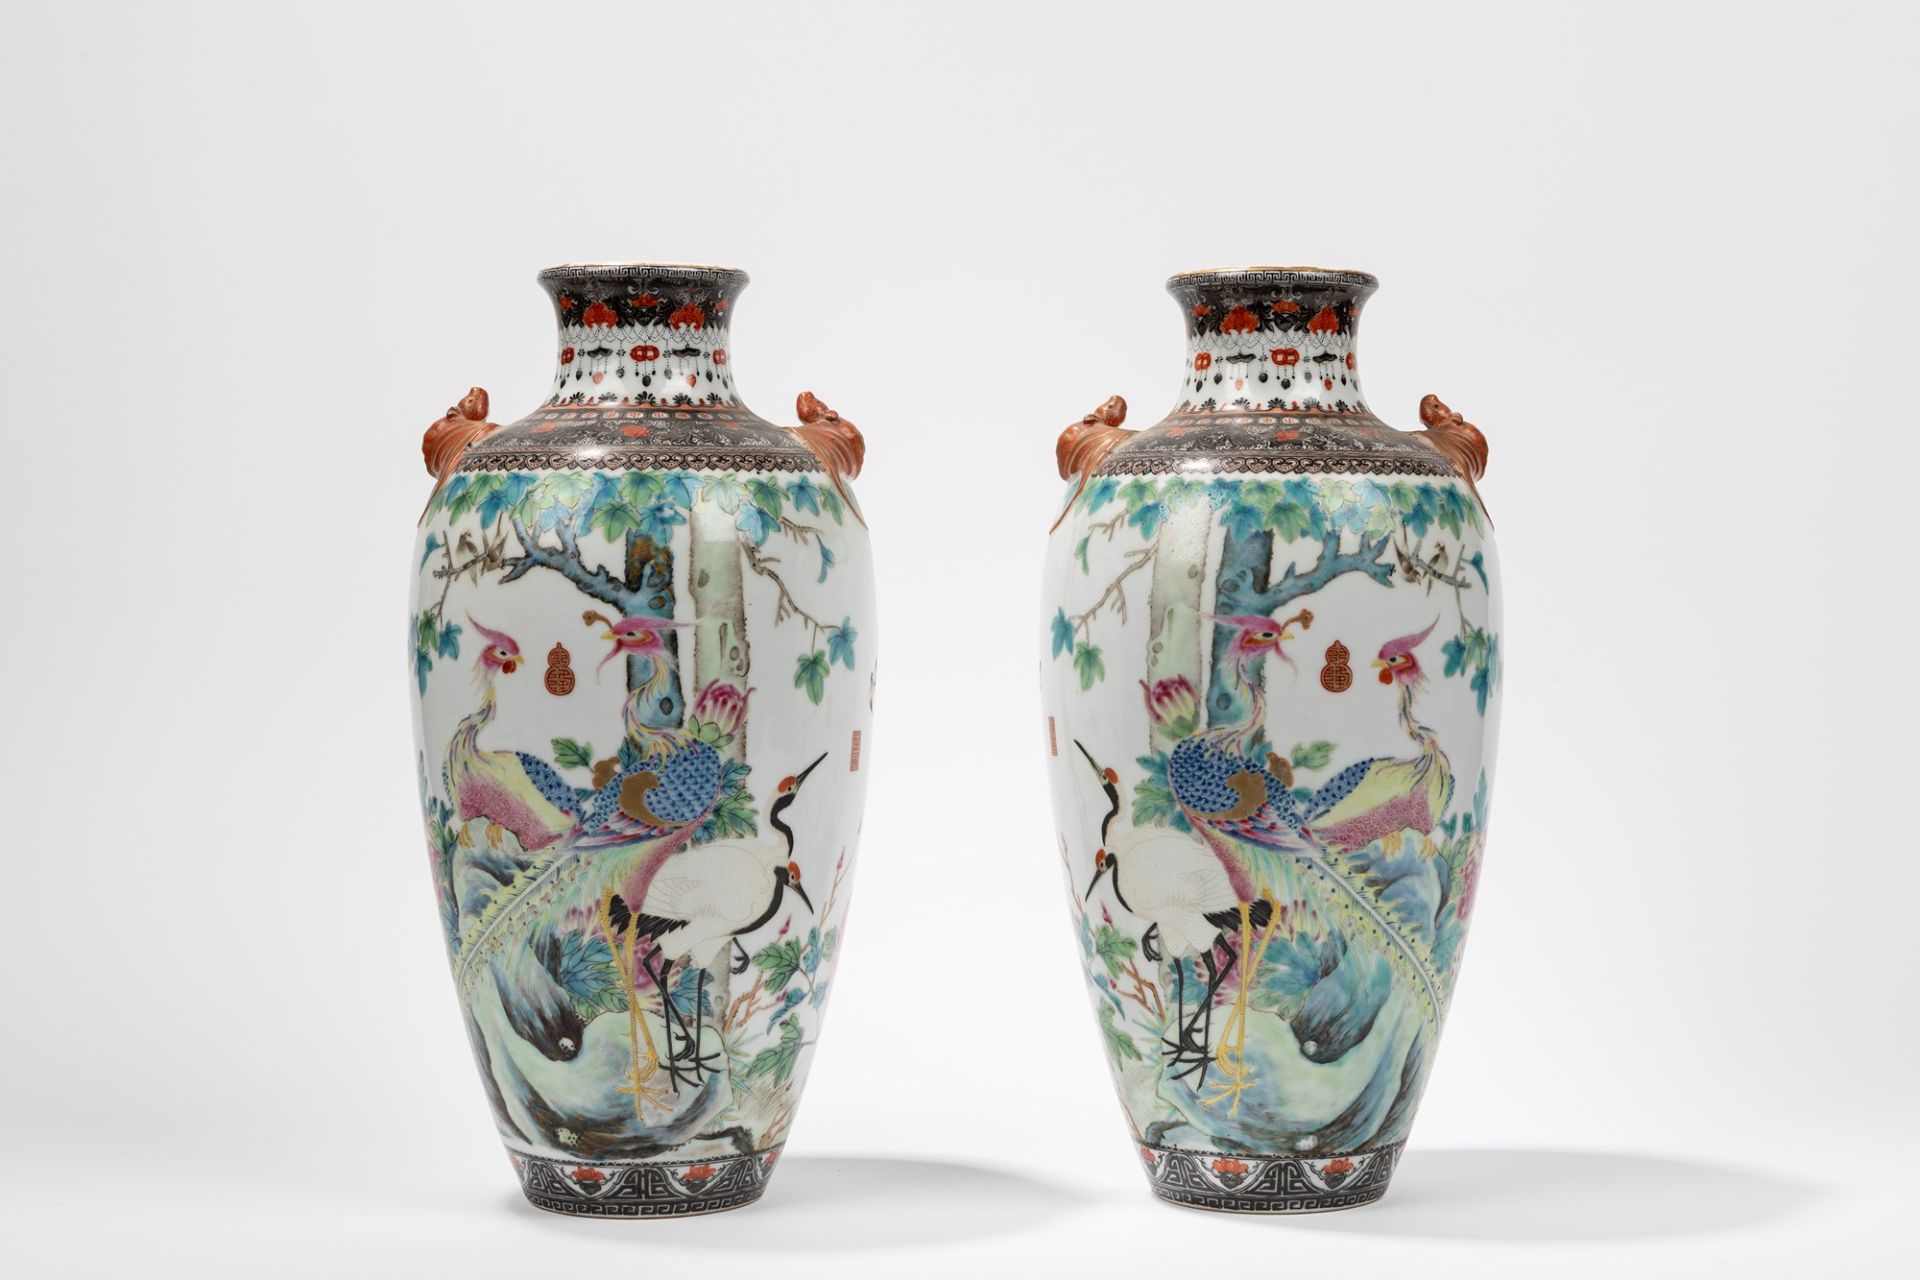 A PAIR OF FAMILLE ROSE VASES, China, Republic period (1912-1949)